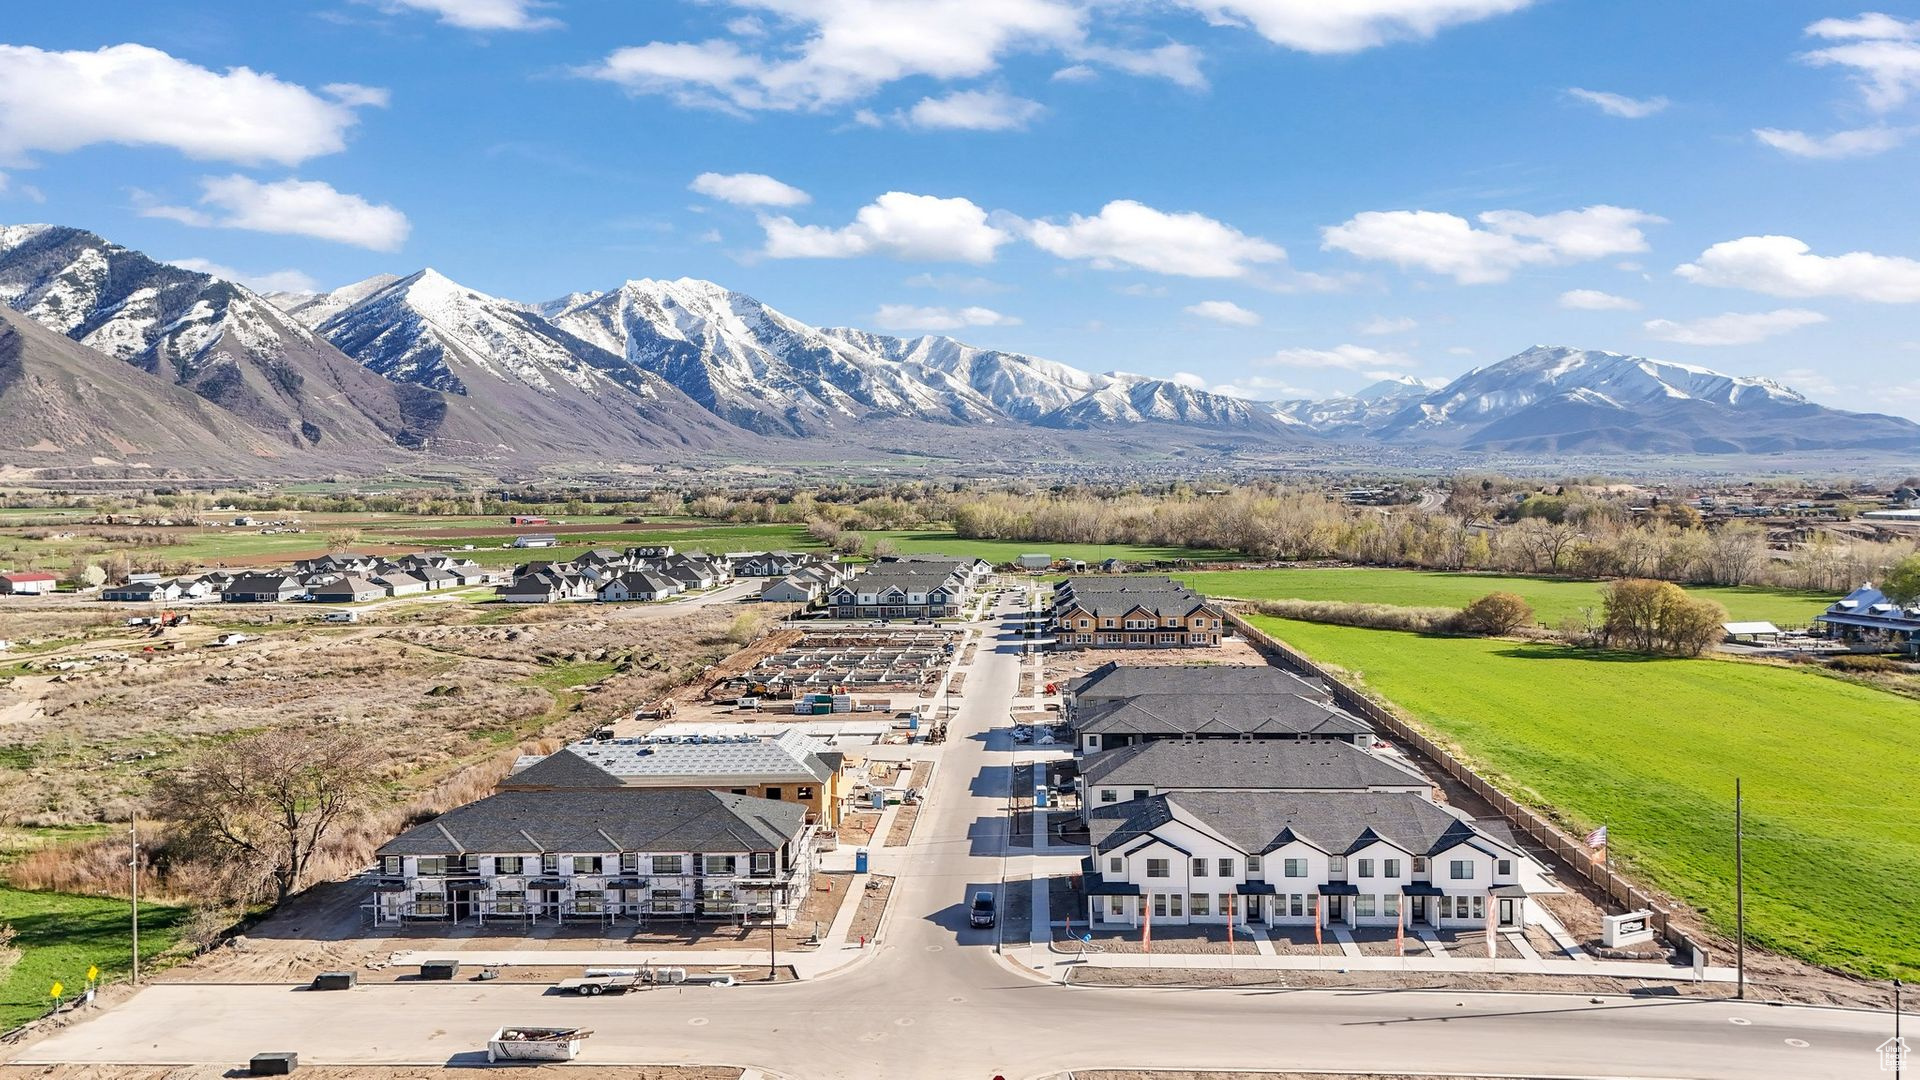 1132 S 200 E #41, Spanish Fork, Utah 84660, 3 Bedrooms Bedrooms, 11 Rooms Rooms,1 BathroomBathrooms,Residential,For sale,200,1992737